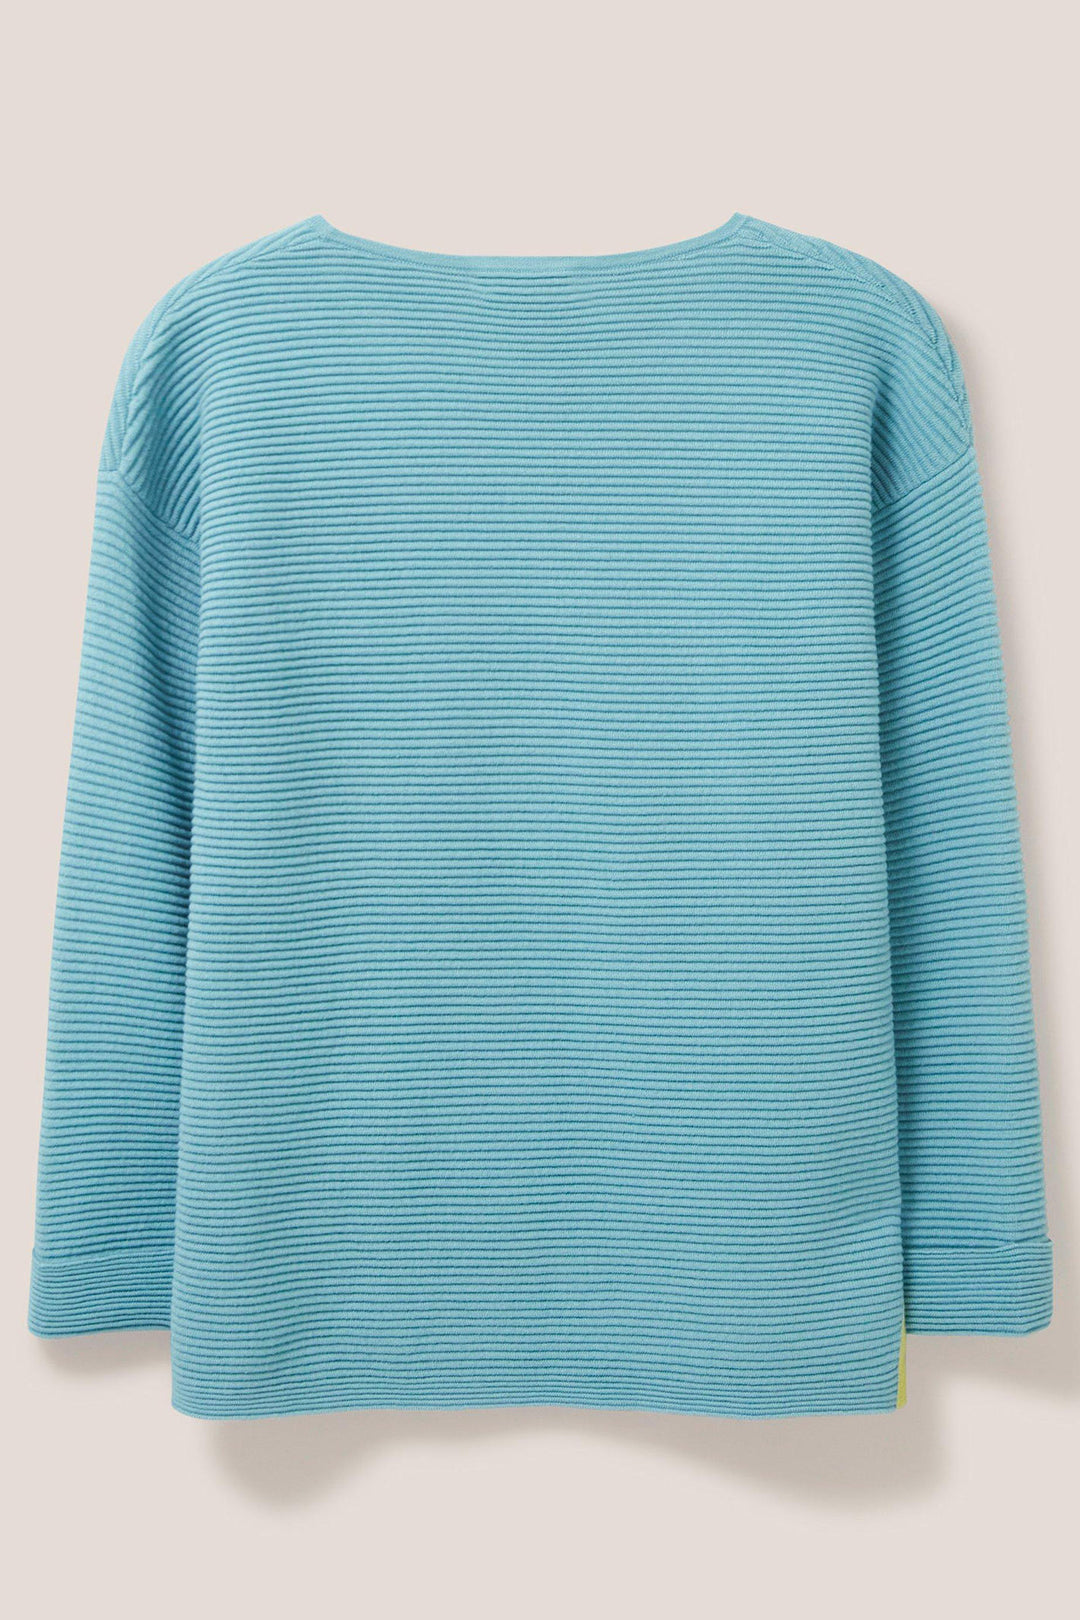 White Stuff 439249 Jana Mid Teal Blue Relaxed Shoulder Ribbed Jumper  - Shirley Allum Boutique